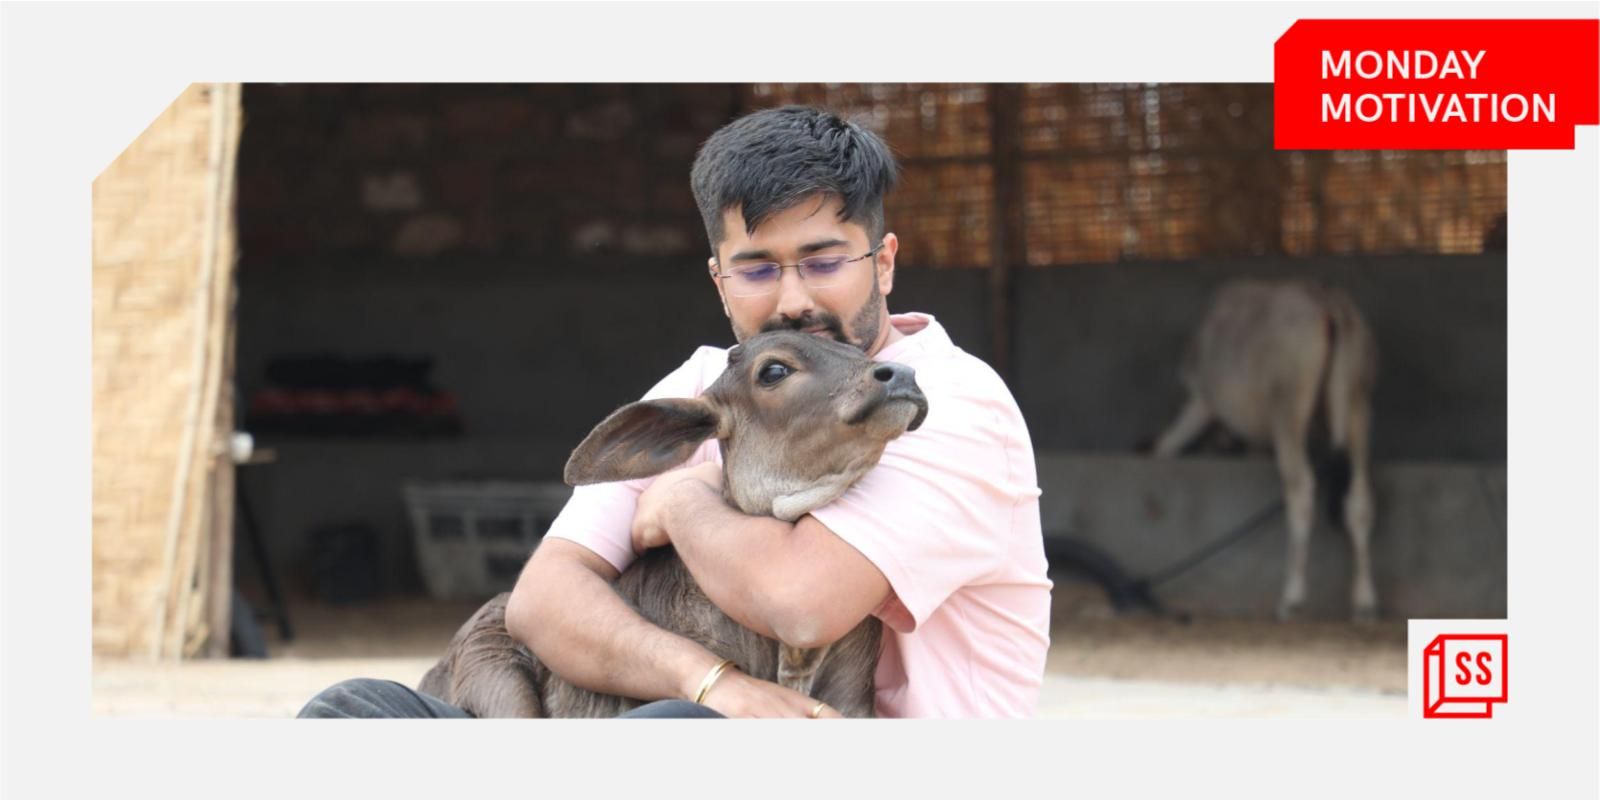 [Monday Motivation] Meet the dog lover who has rescued and treated over 20k strays in Jodhpur